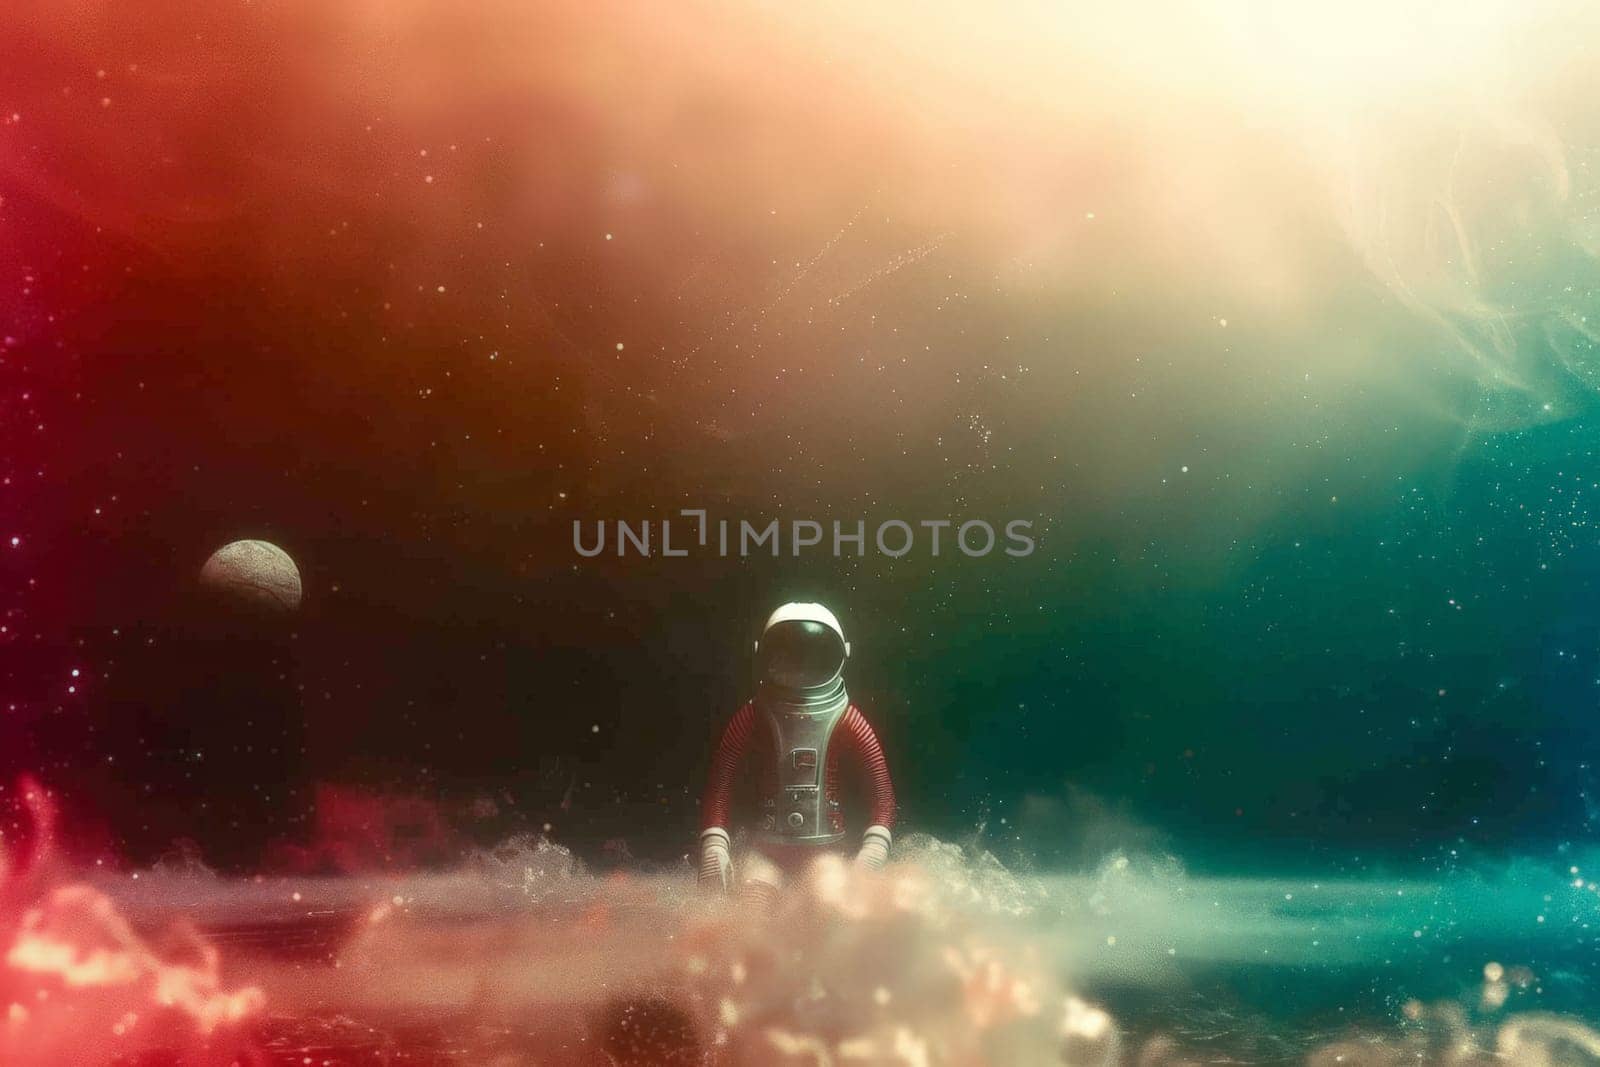 A man in a red spacesuit is standing in a pool of water. The water is red, blue, and green, and the sky is filled with stars. The image has a dreamy, otherworldly feel to it